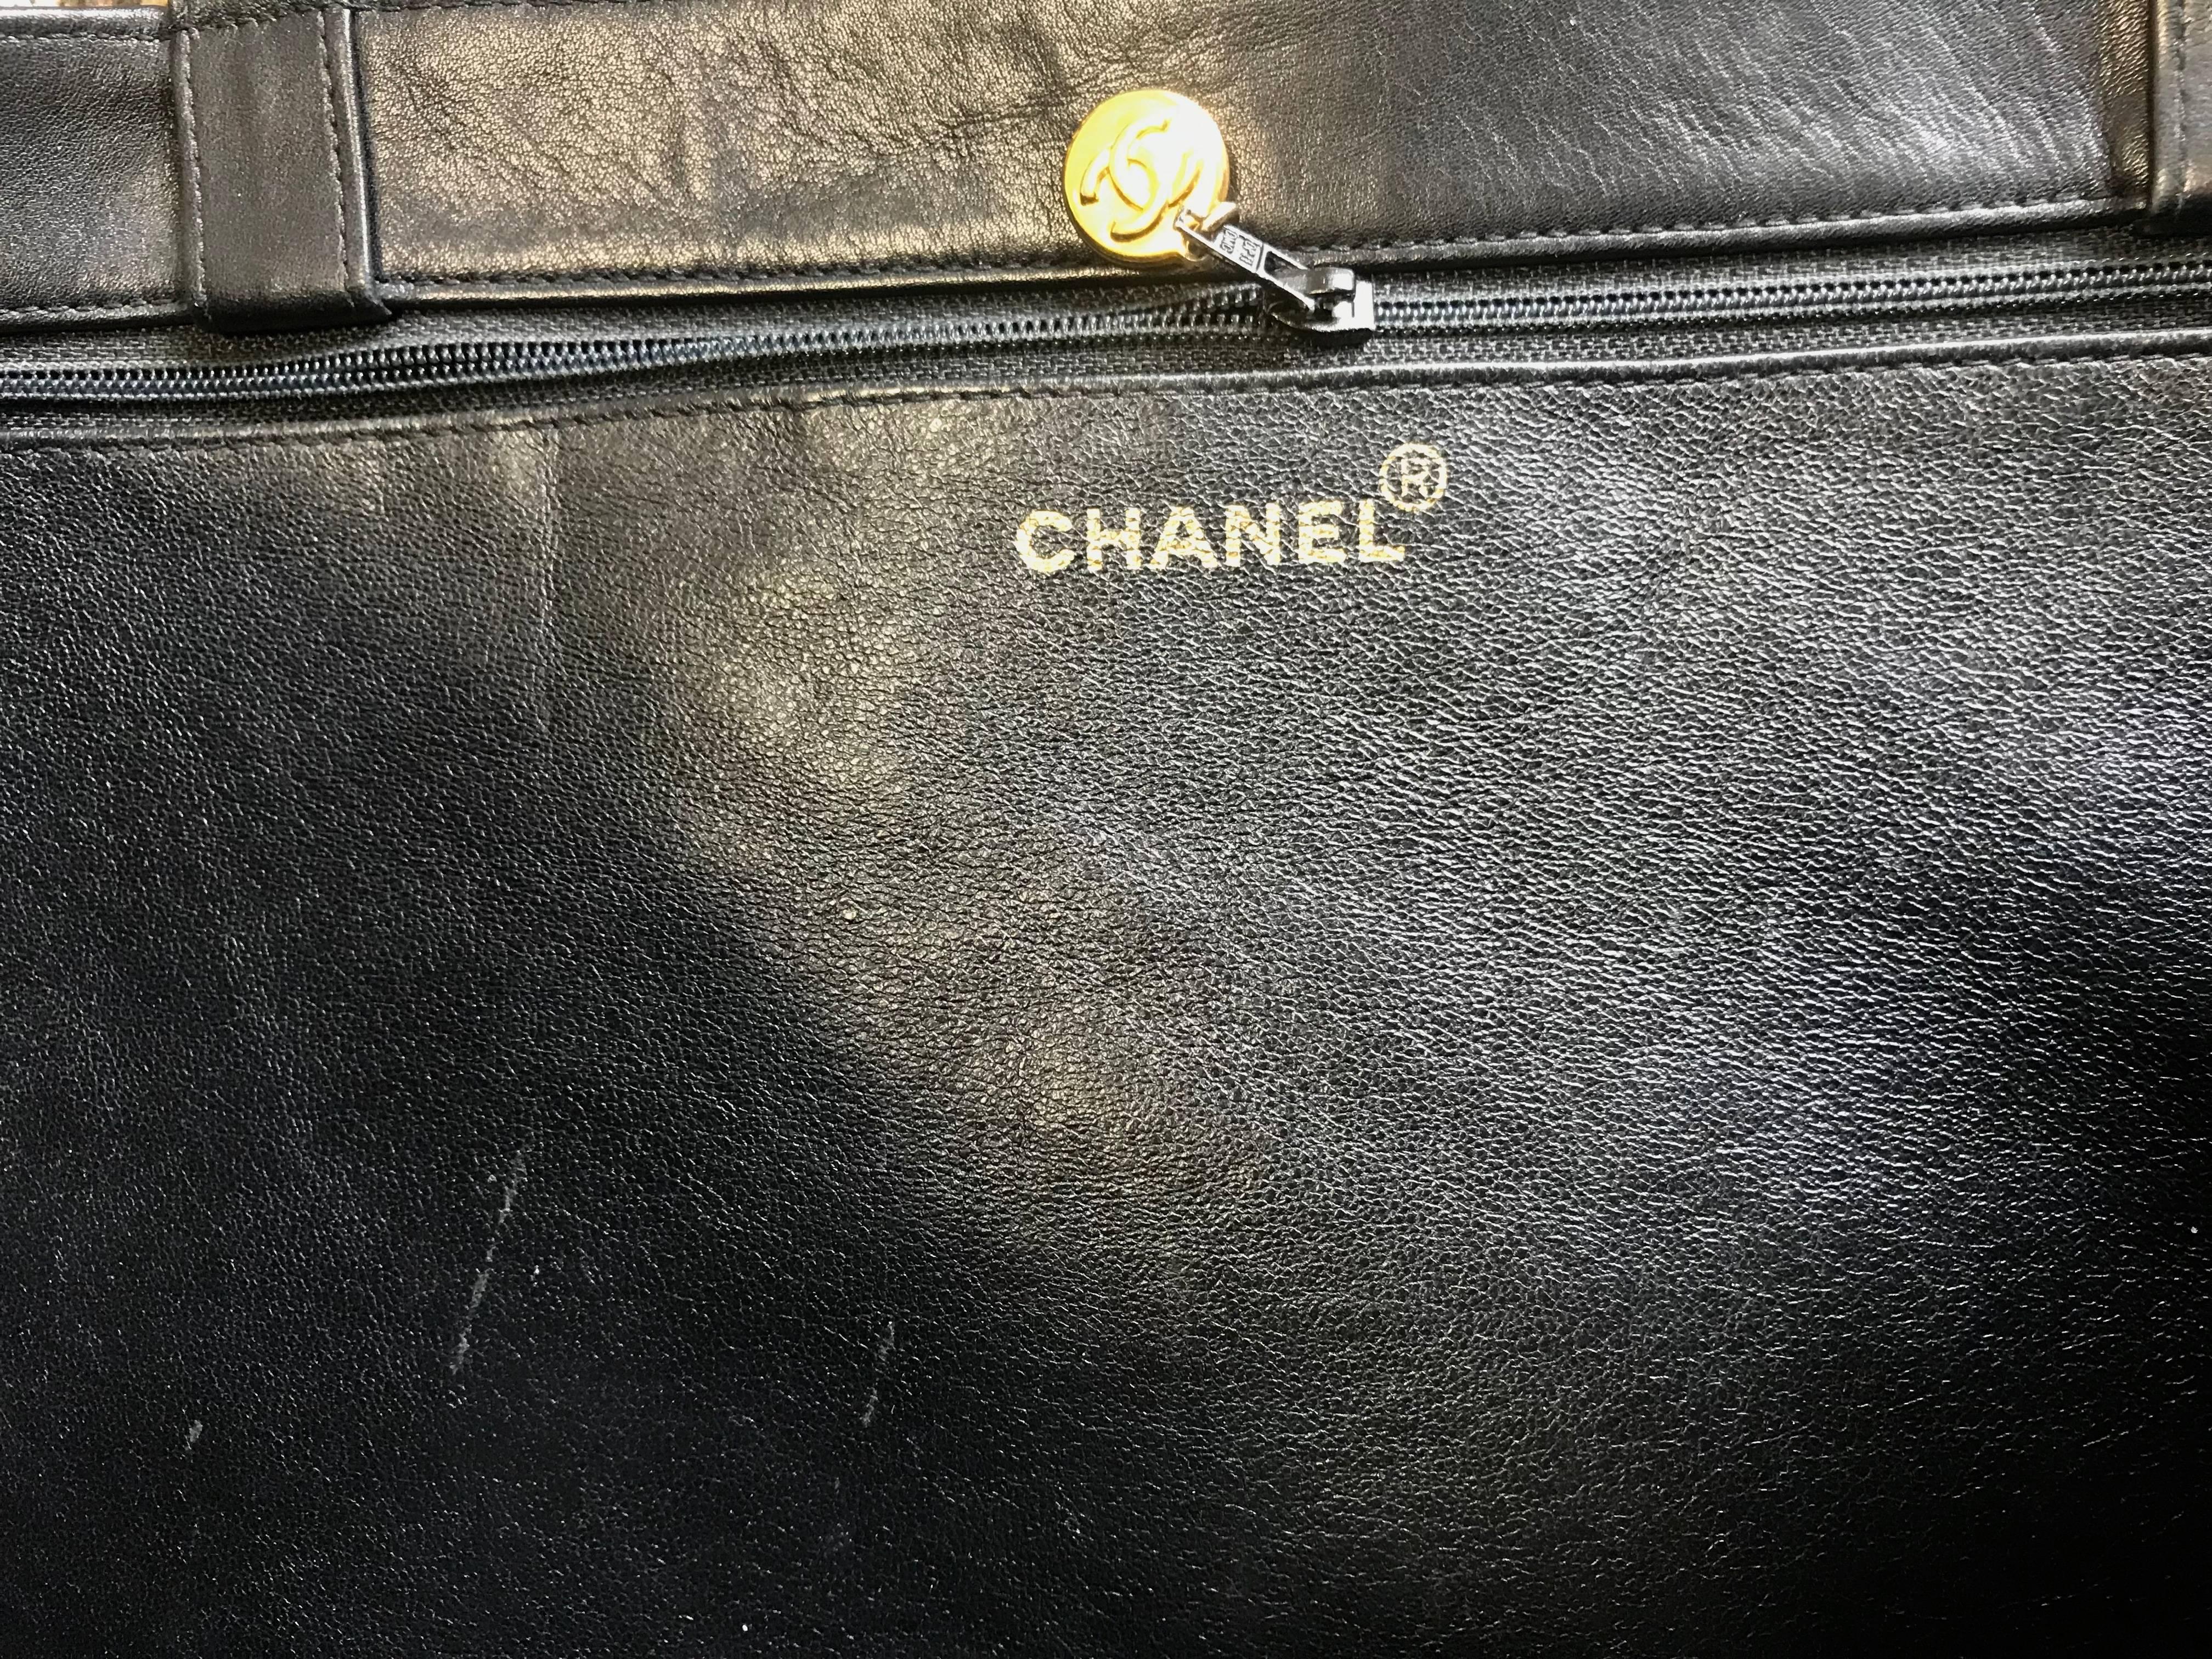 Chanel Vintage black calfskin large tote bag with gold tone chain handles and CC 8